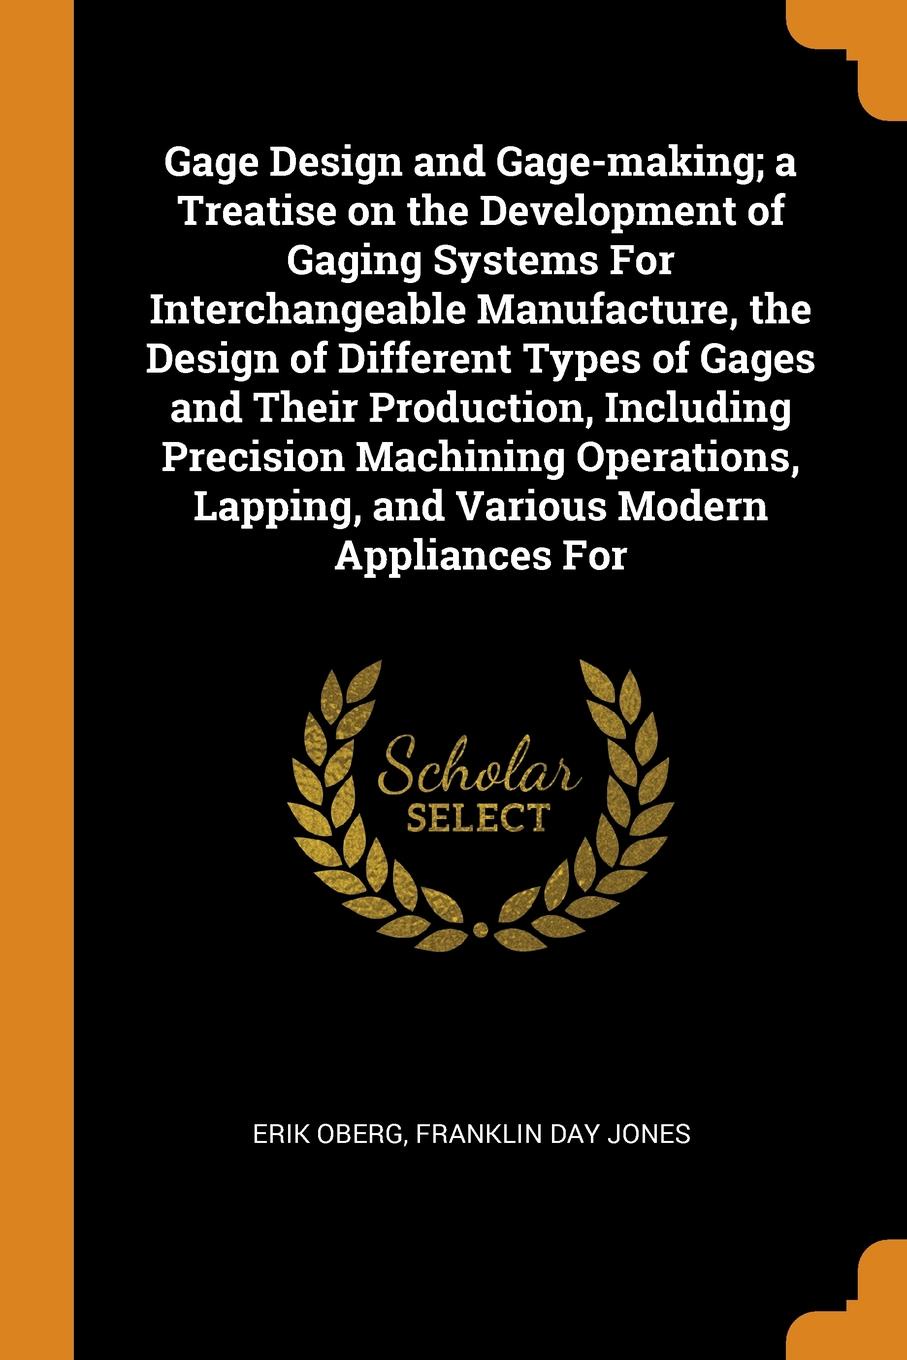 Gage Design and Gage-making; a Treatise on the Development of Gaging Systems For Interchangeable Manufacture, the Design of Different Types of Gages and Their Production, Including Precision Machining Operations, Lapping, and Various Modern Applia...